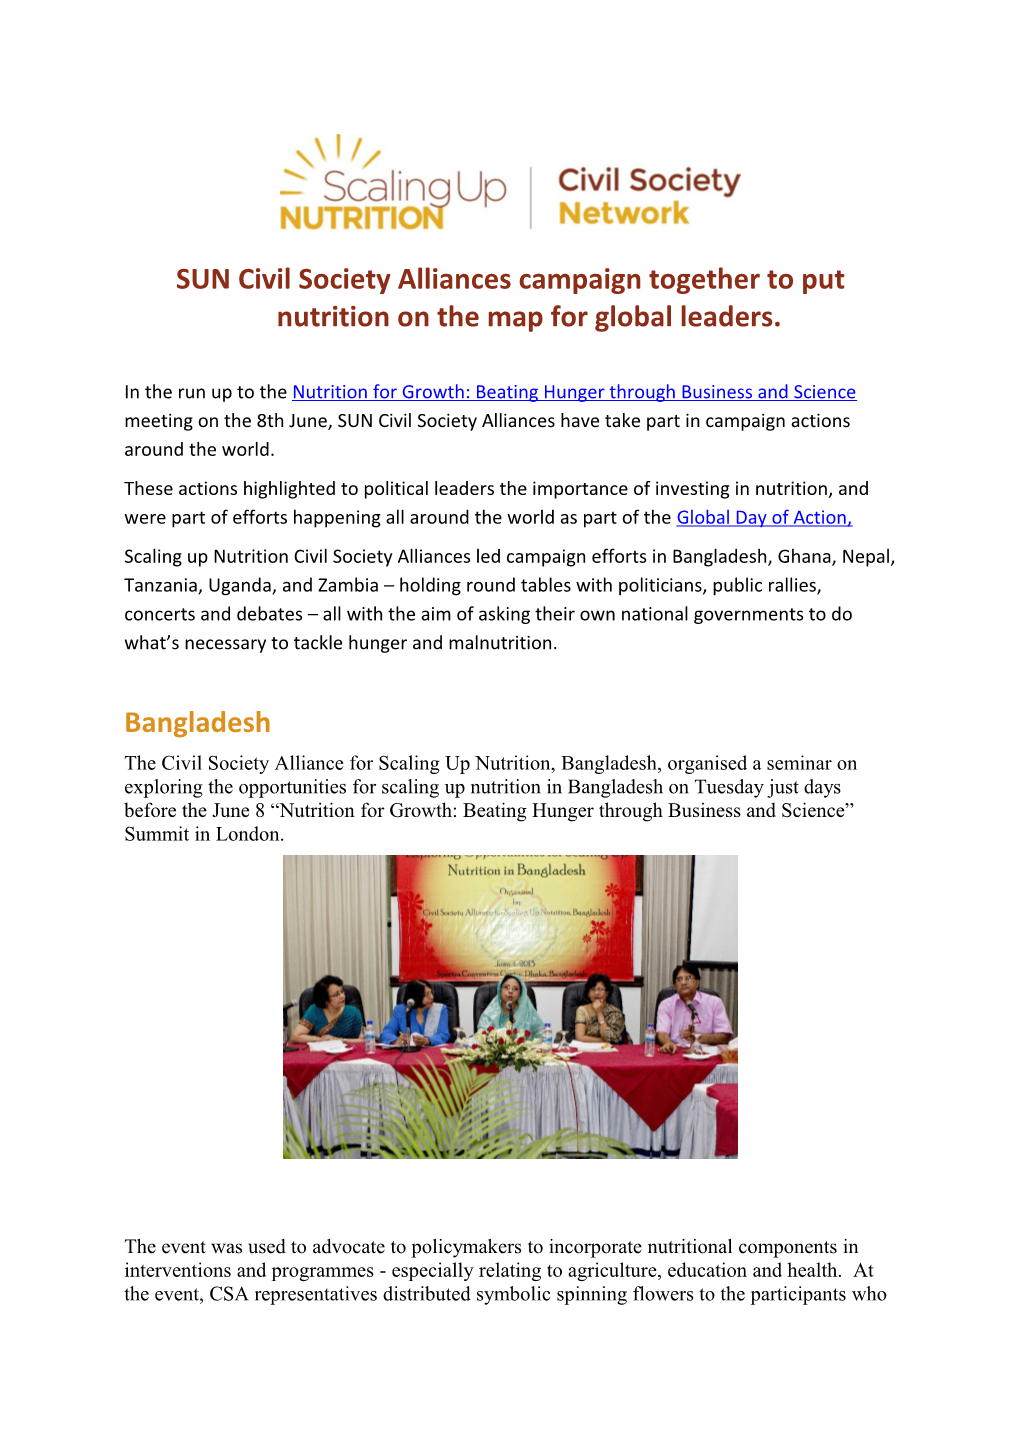 SUN Civil Society Alliances Campaign Together to Put Nutrition on the Map for Global Leaders